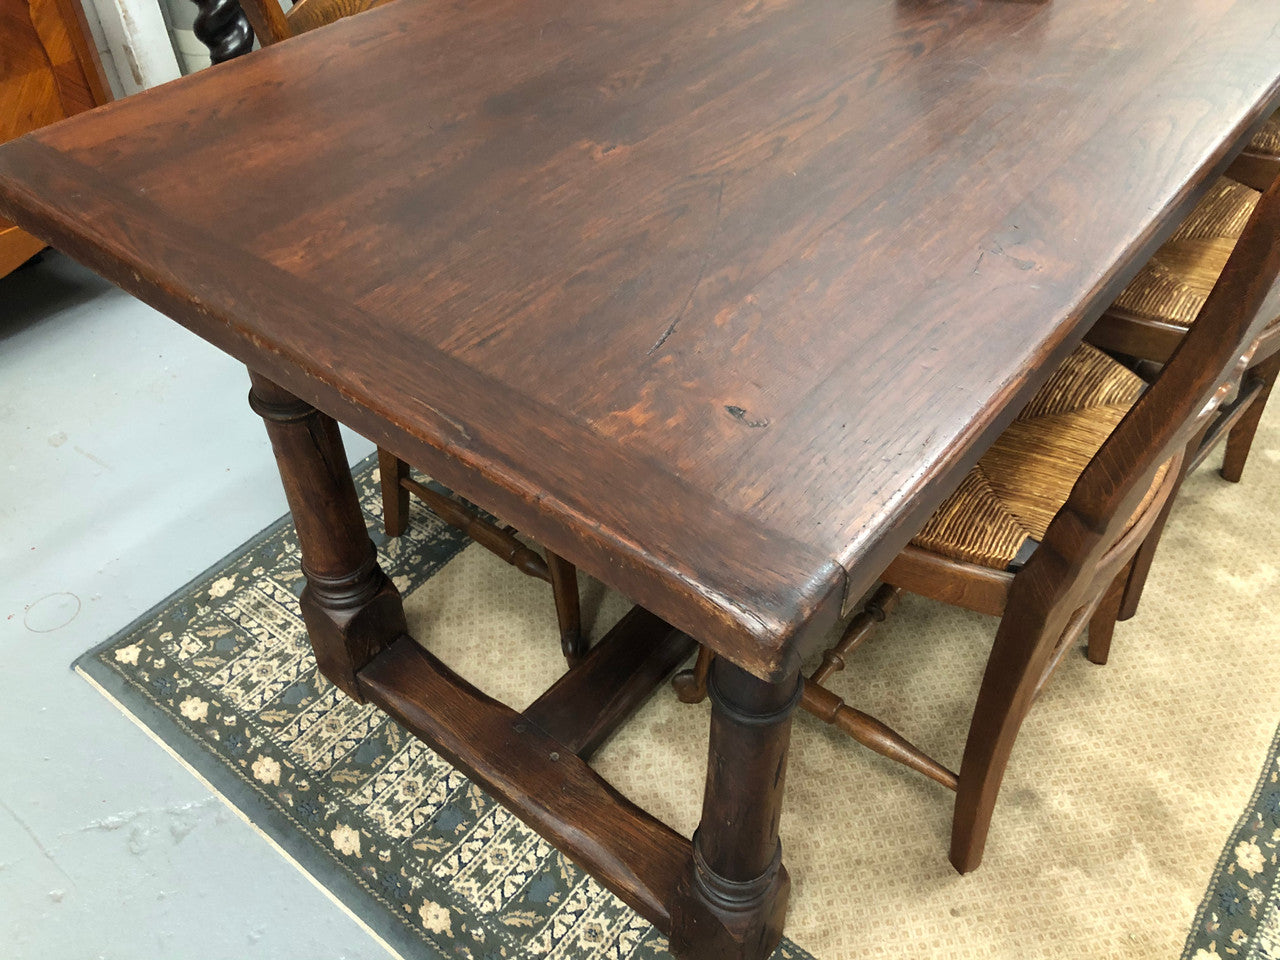 French dark Oak stretcher based farmhouse table. Can sit 6-8 people and is in very good original condition.